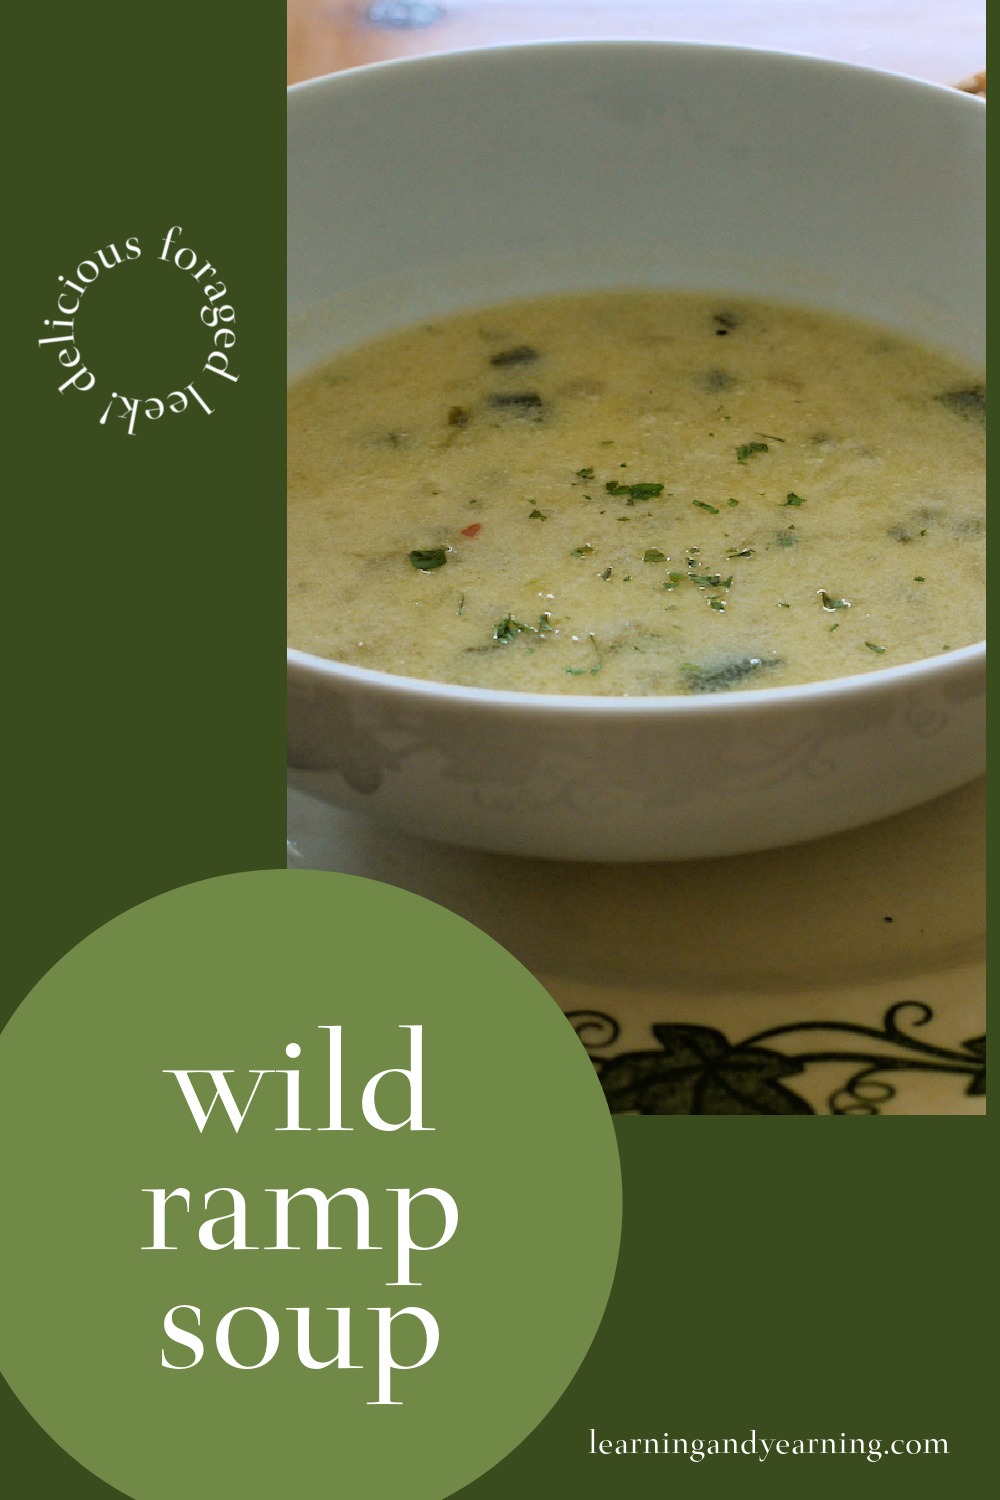 Forage ramps in the spring to make delicious wild leek soup!